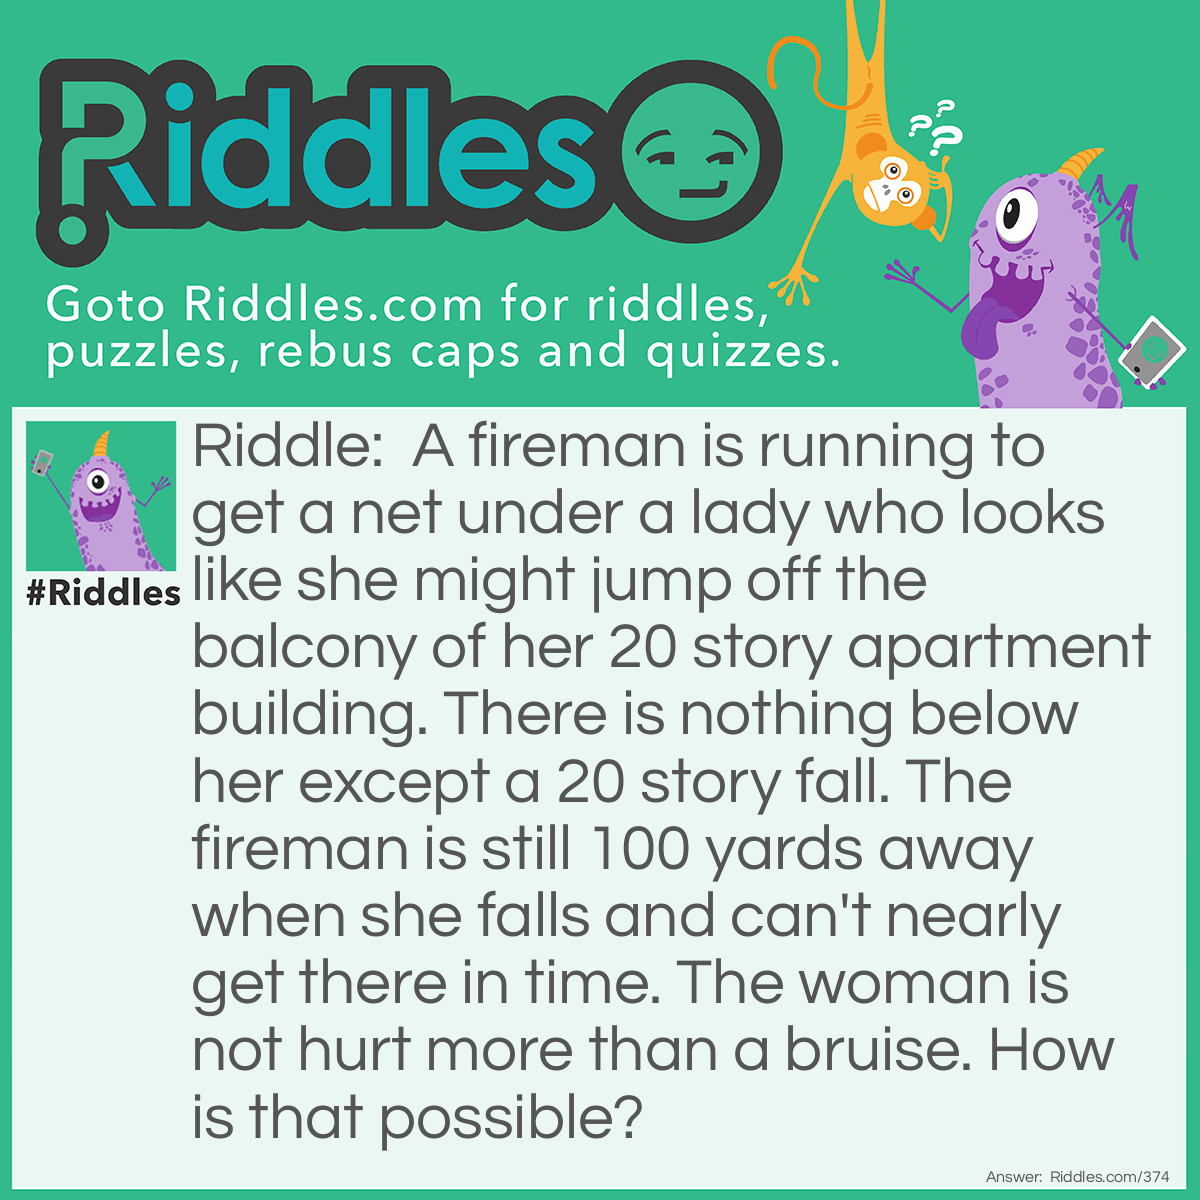 Riddle: A fireman is running to get a net under a lady who looks like she might jump off the balcony of her 20 story apartment building. There is nothing below her except a 20 story fall. The fireman is still 100 yards away when she falls and can't nearly get there in time. The woman is not hurt more than a bruise. How is that possible? Answer: She fell back into her apartment, jumping from the balcony into the inside.